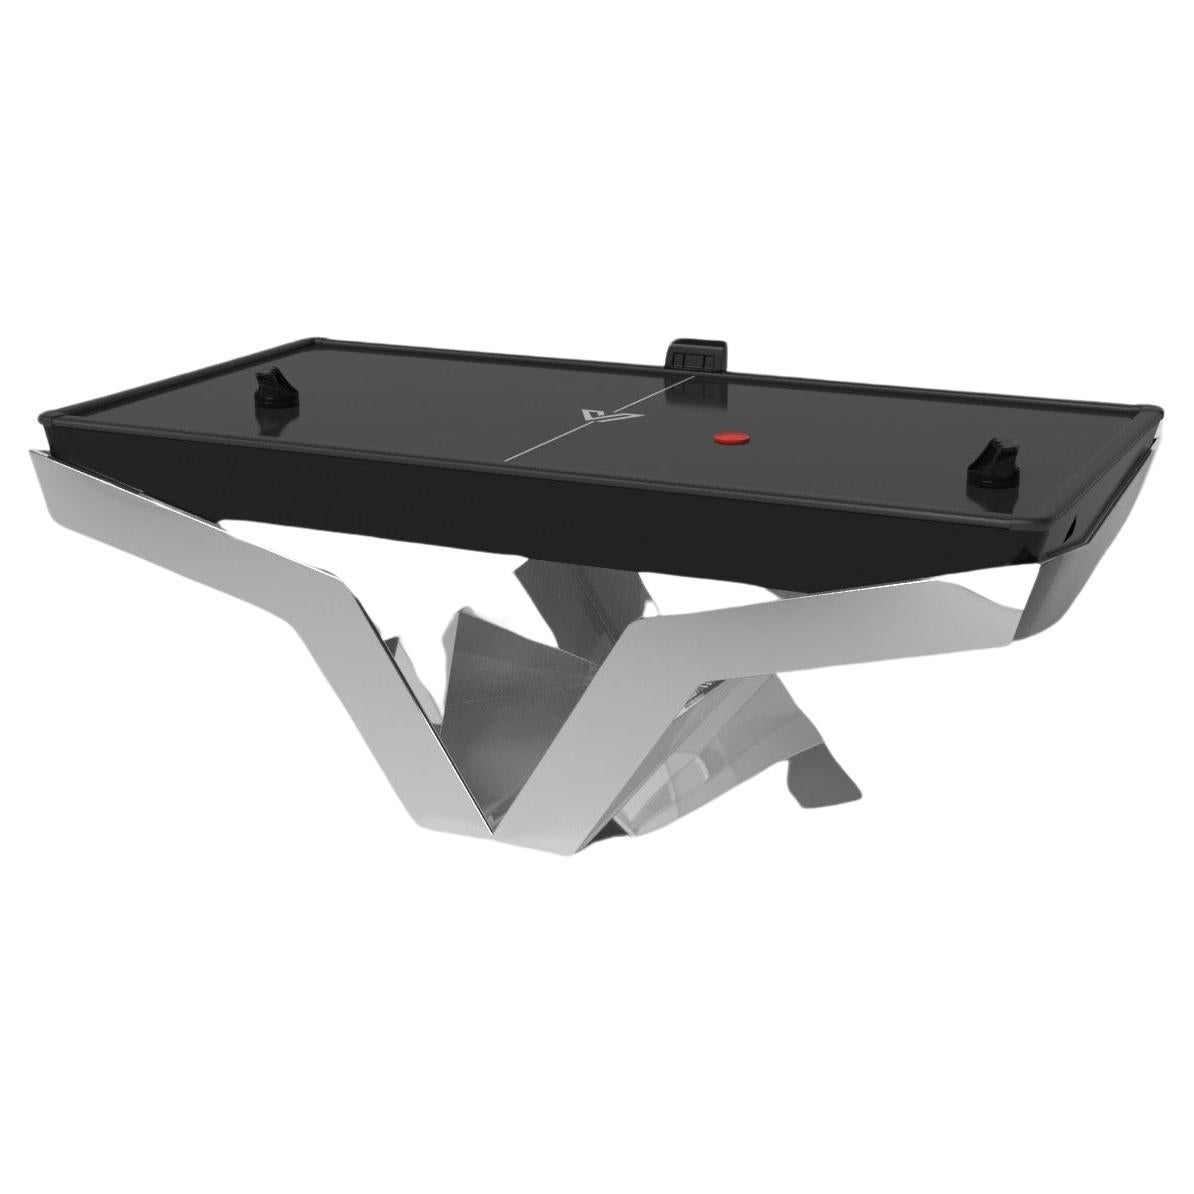 Elevate Customs Enzo Air Hockey Tables /Stainless Steel Metal in 7' -Made in USA